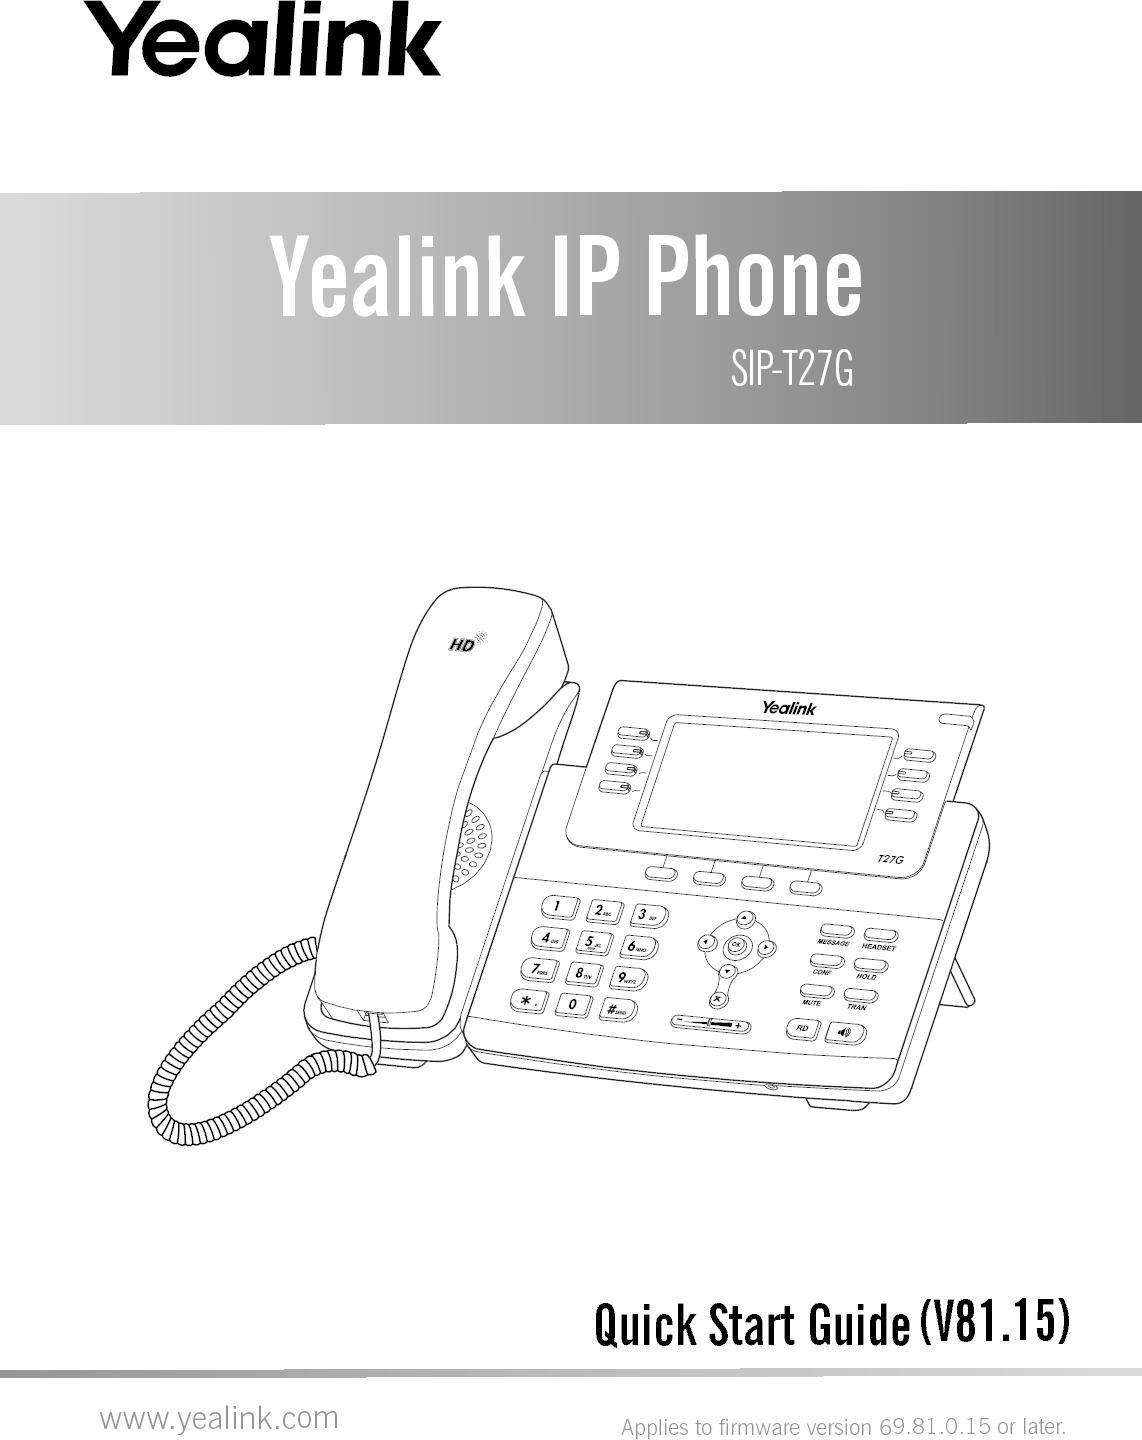 Quick Start Guide (V81.15)Yealink IP Phone SIP-T27Gwww.yealink.comT27GApplies to firmware version 69.81.0.15 or later.